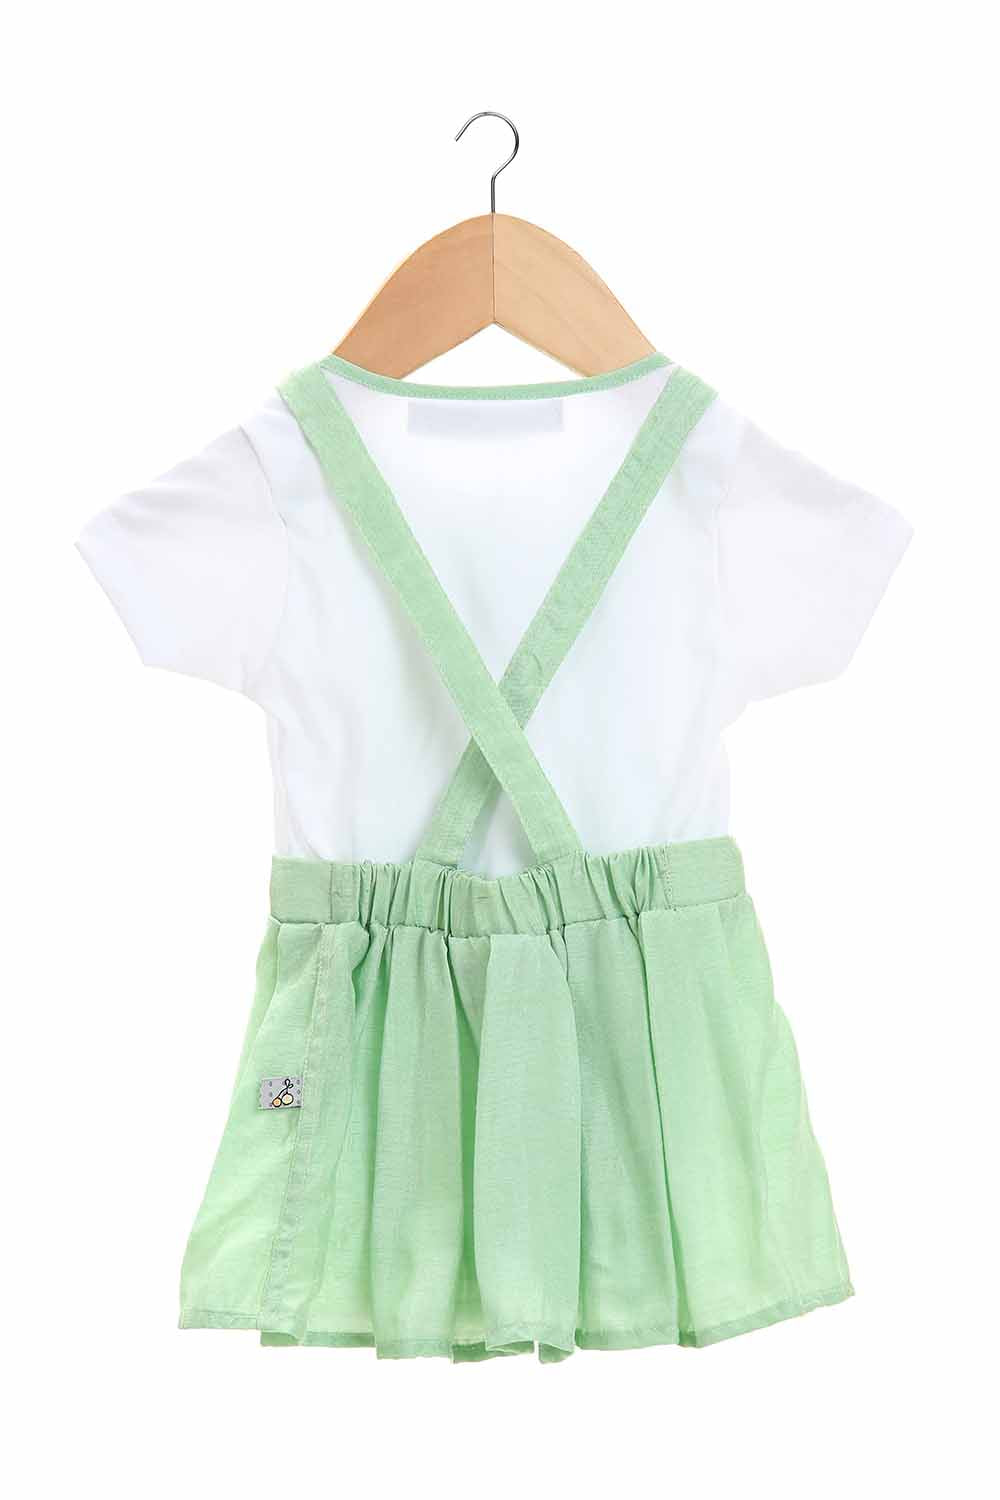 embroidered mint baby girls pinafore-2